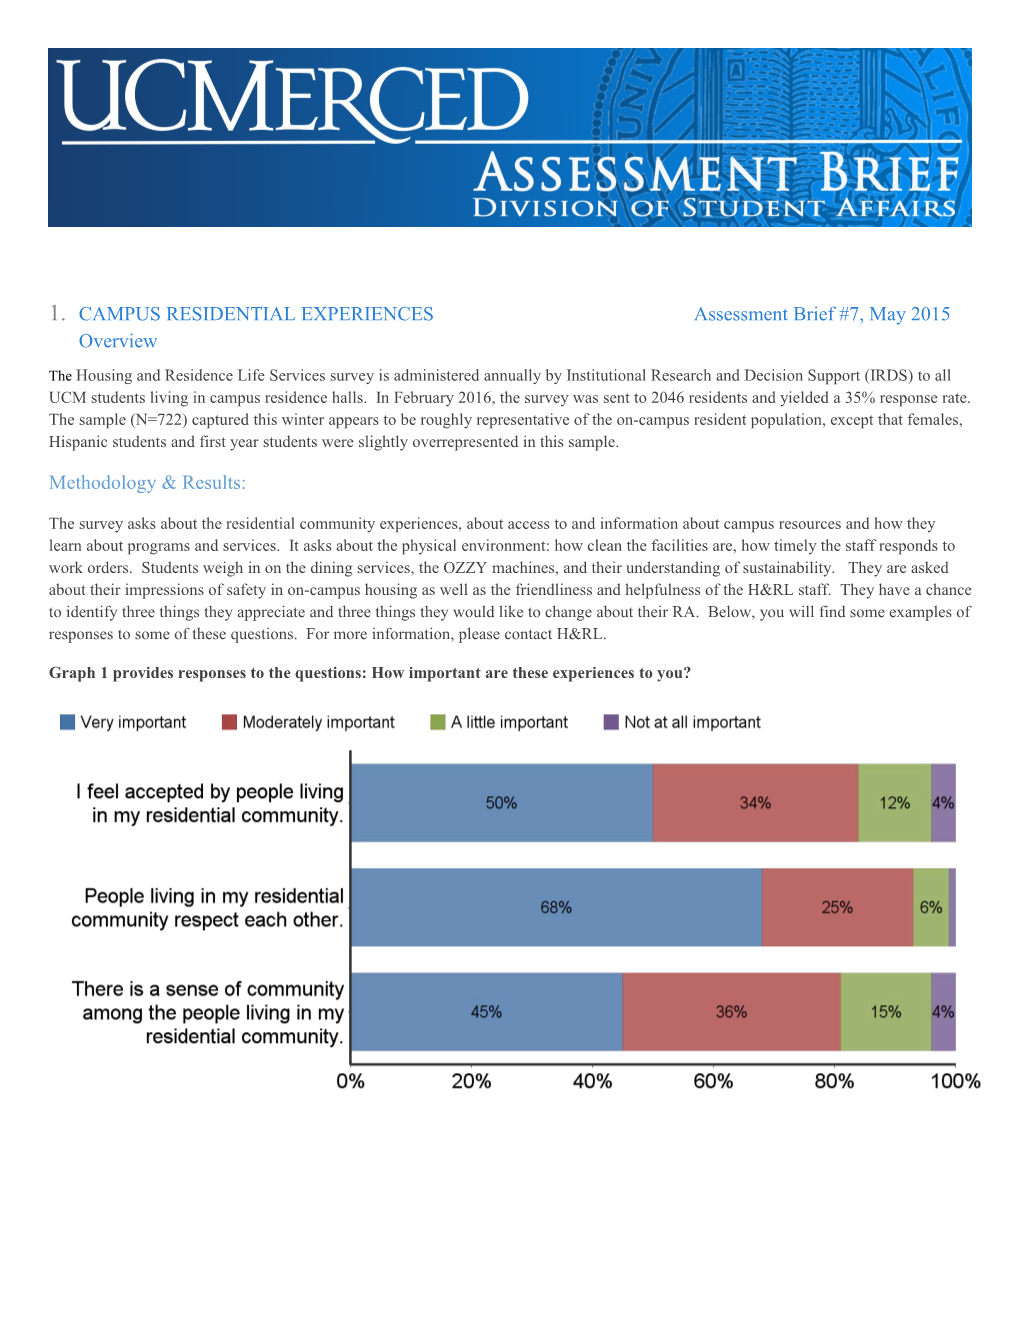 CAMPUS RESIDENTIAL EXPERIENCES Assessment Brief #7, May 2015Overview